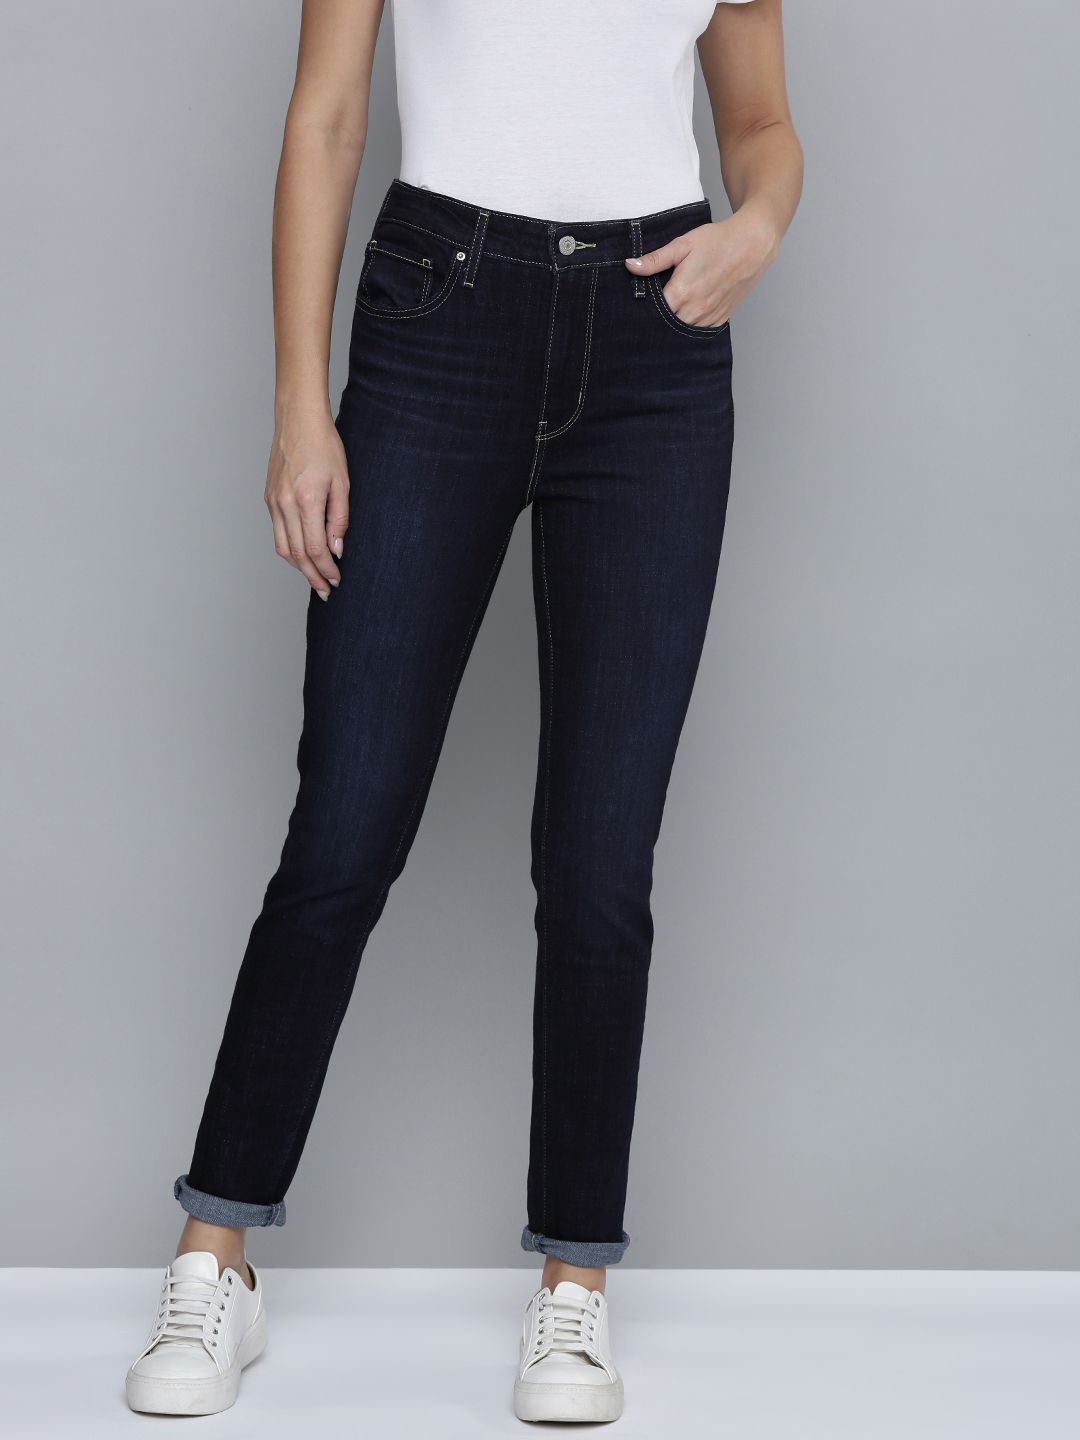 Levis Women Dark Indigo Skinny Fit High-Rise Stretchable Casual Jeans Price in India